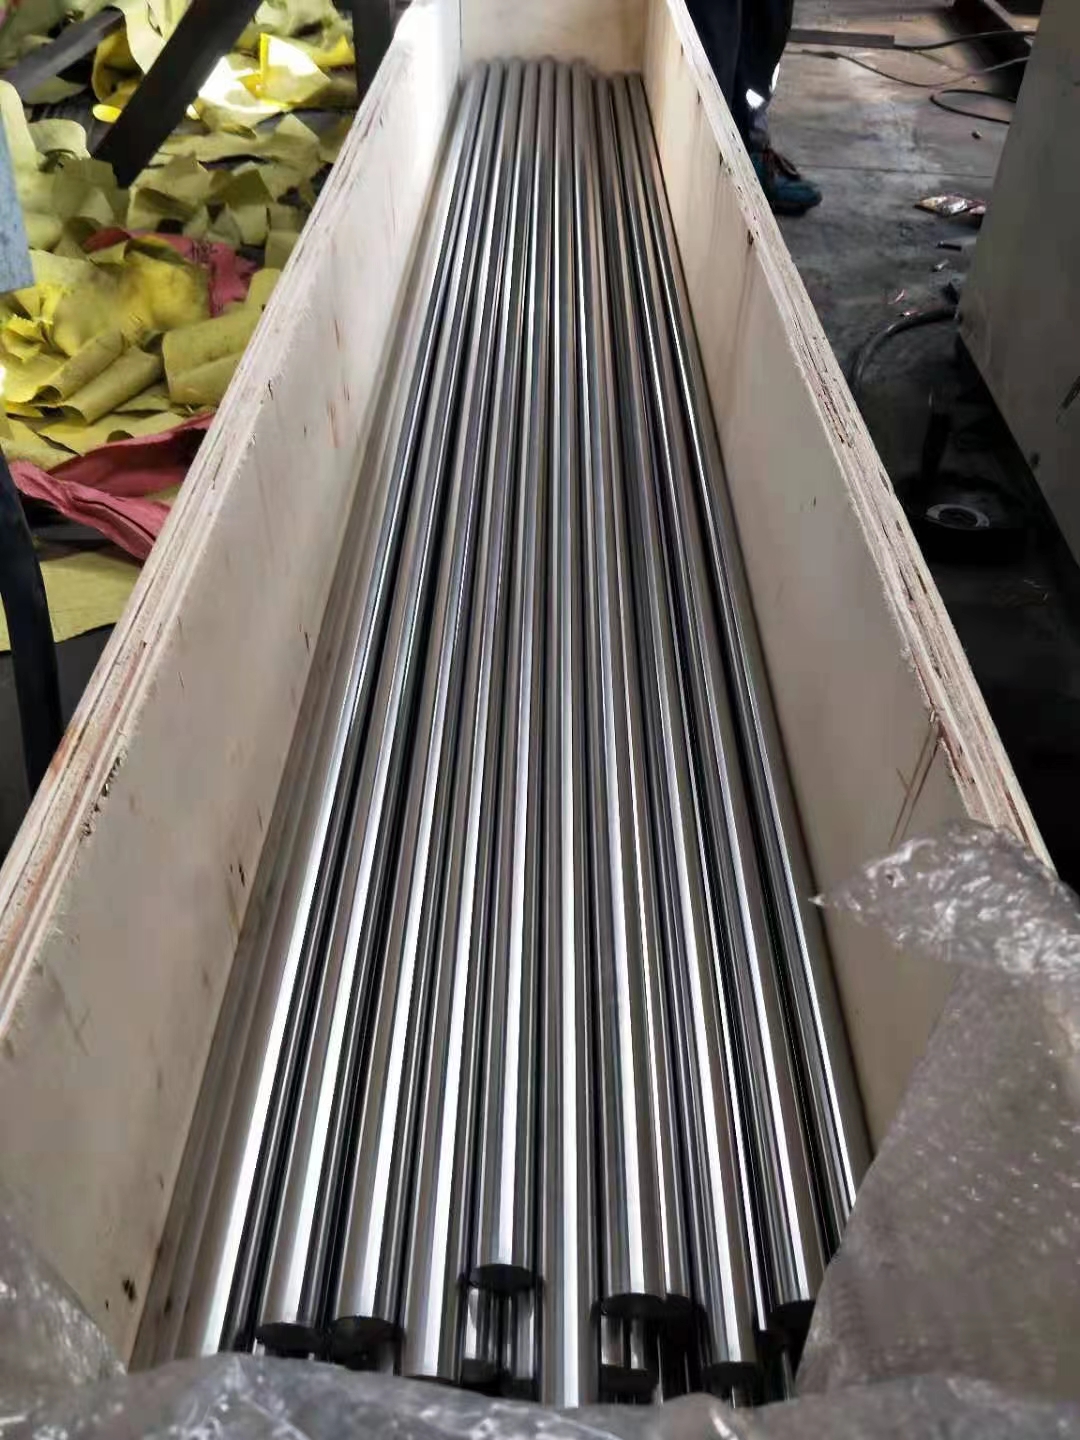 303 Stainless Steel Bar rod manufacturing company in china